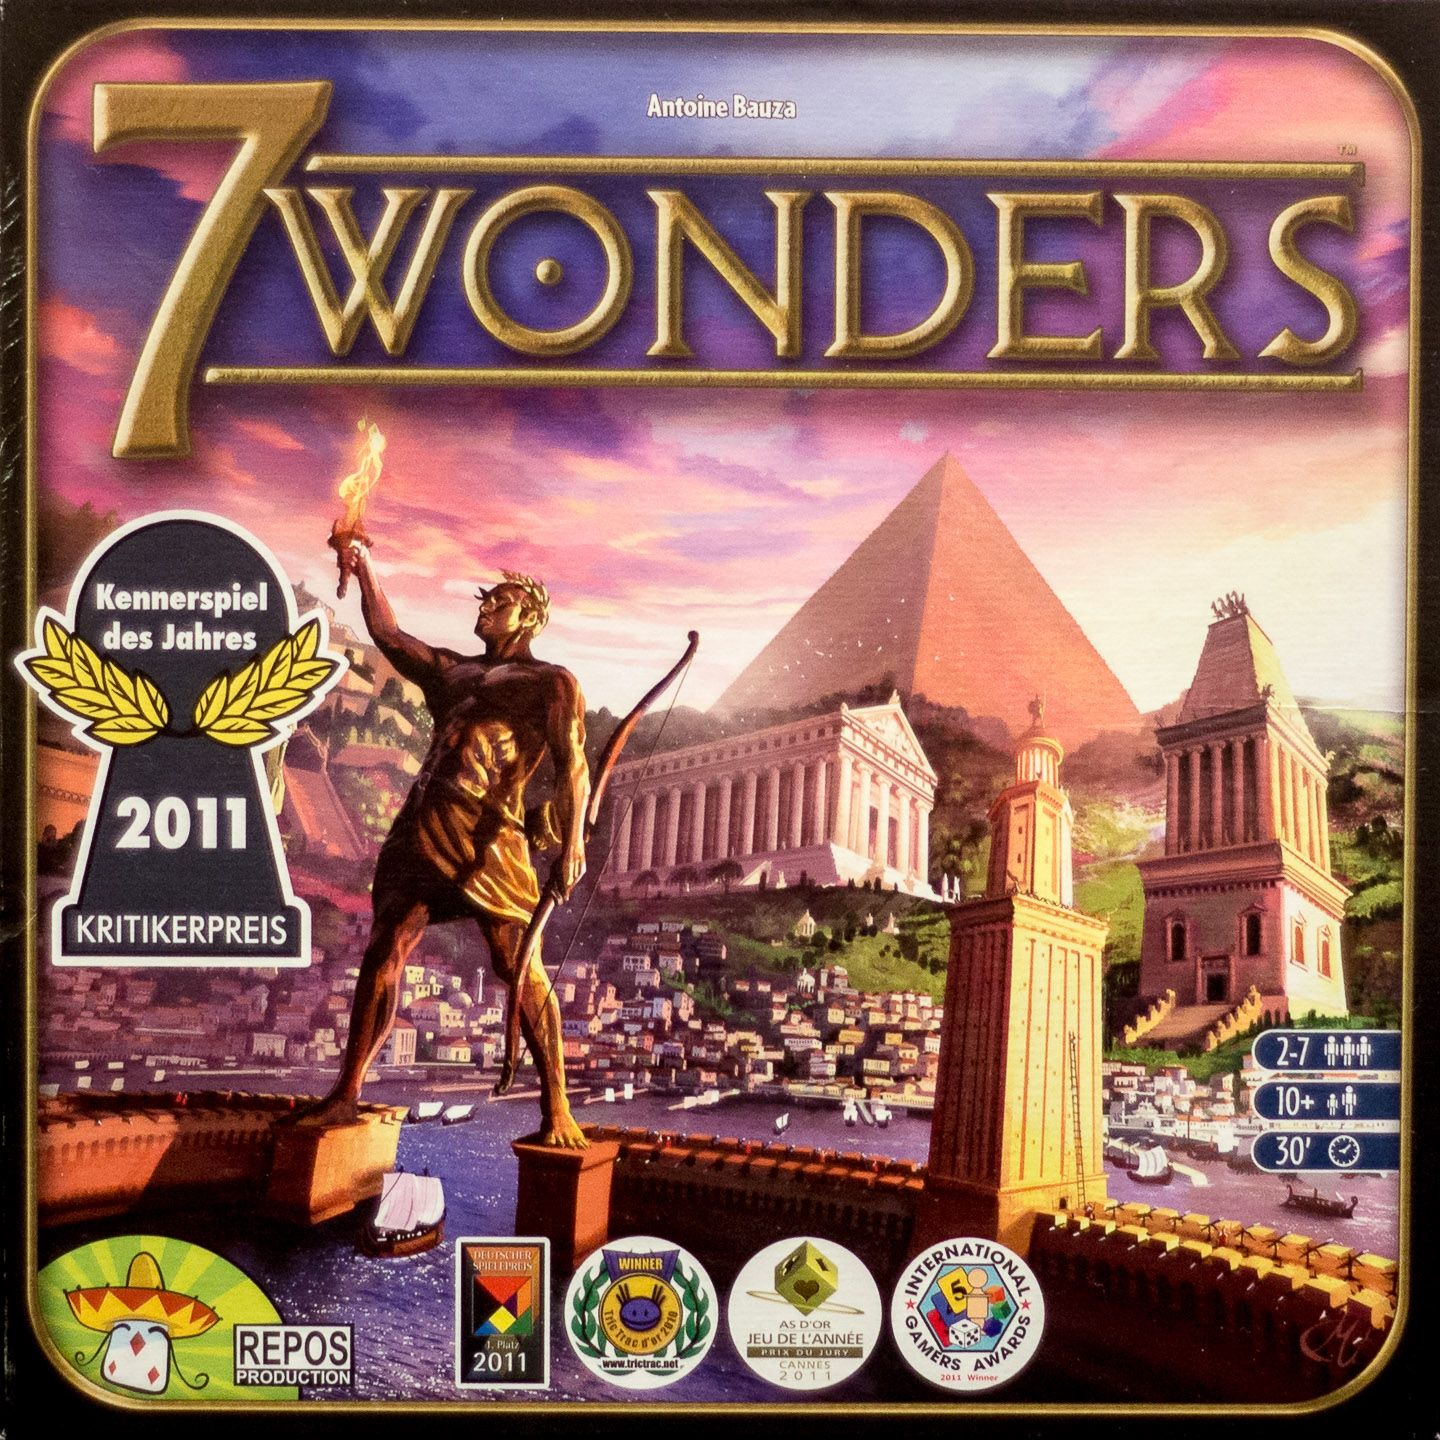 7 Wonders front face